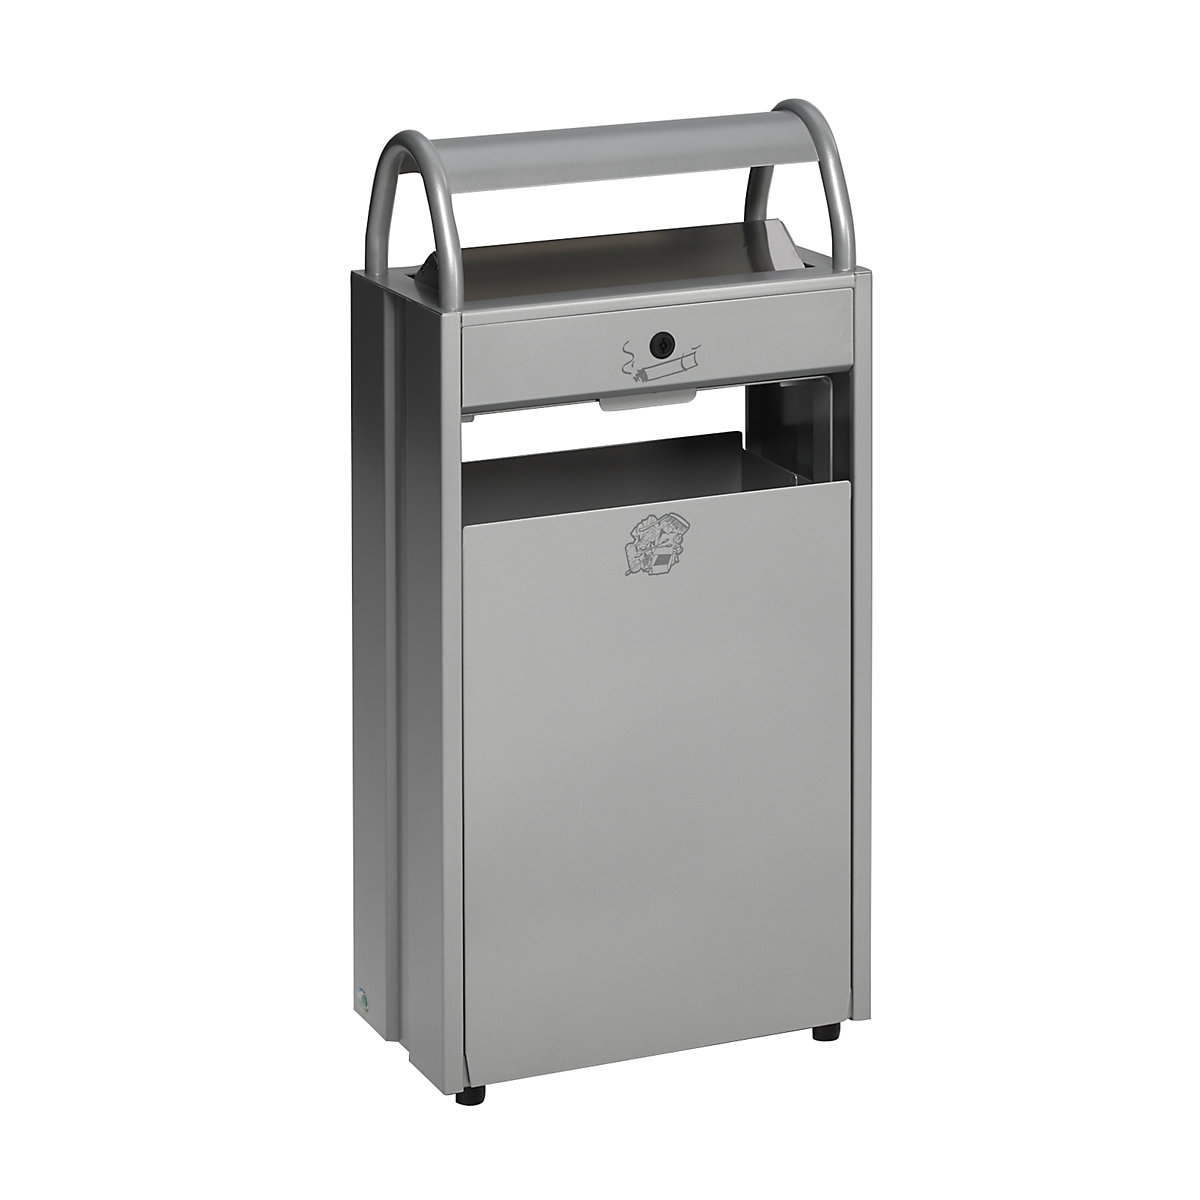 VAR – Waste collector with ashtray, capacity 60 l, WxHxD 480 x 960 x 250 mm, silver